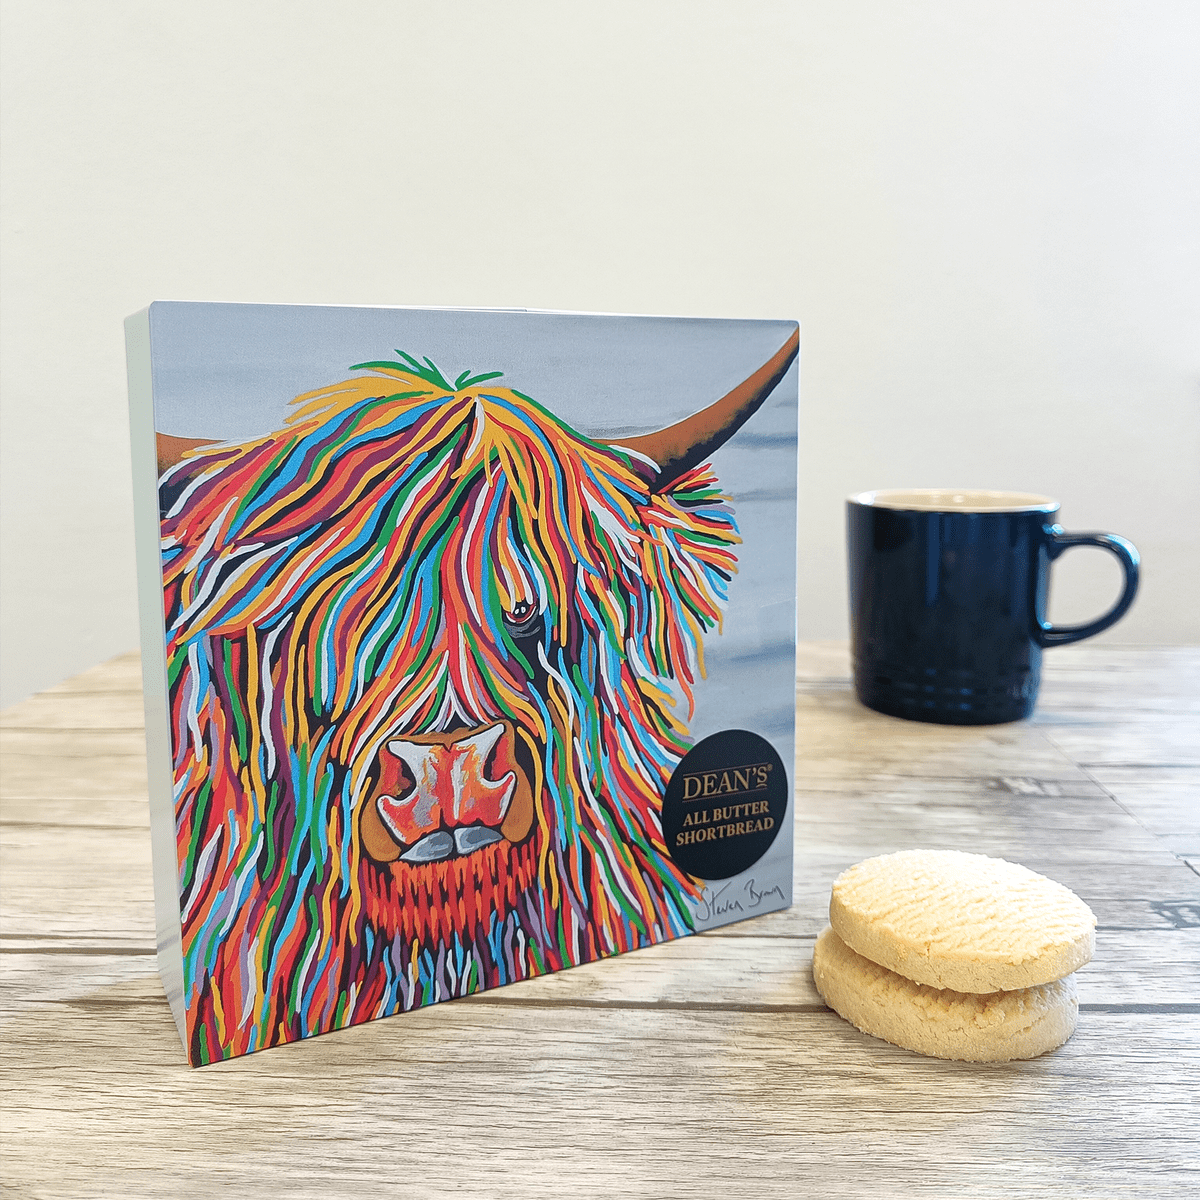 Buy the Big Malky McCoo All Butter Shortbread Rounds 150g online at Dean's